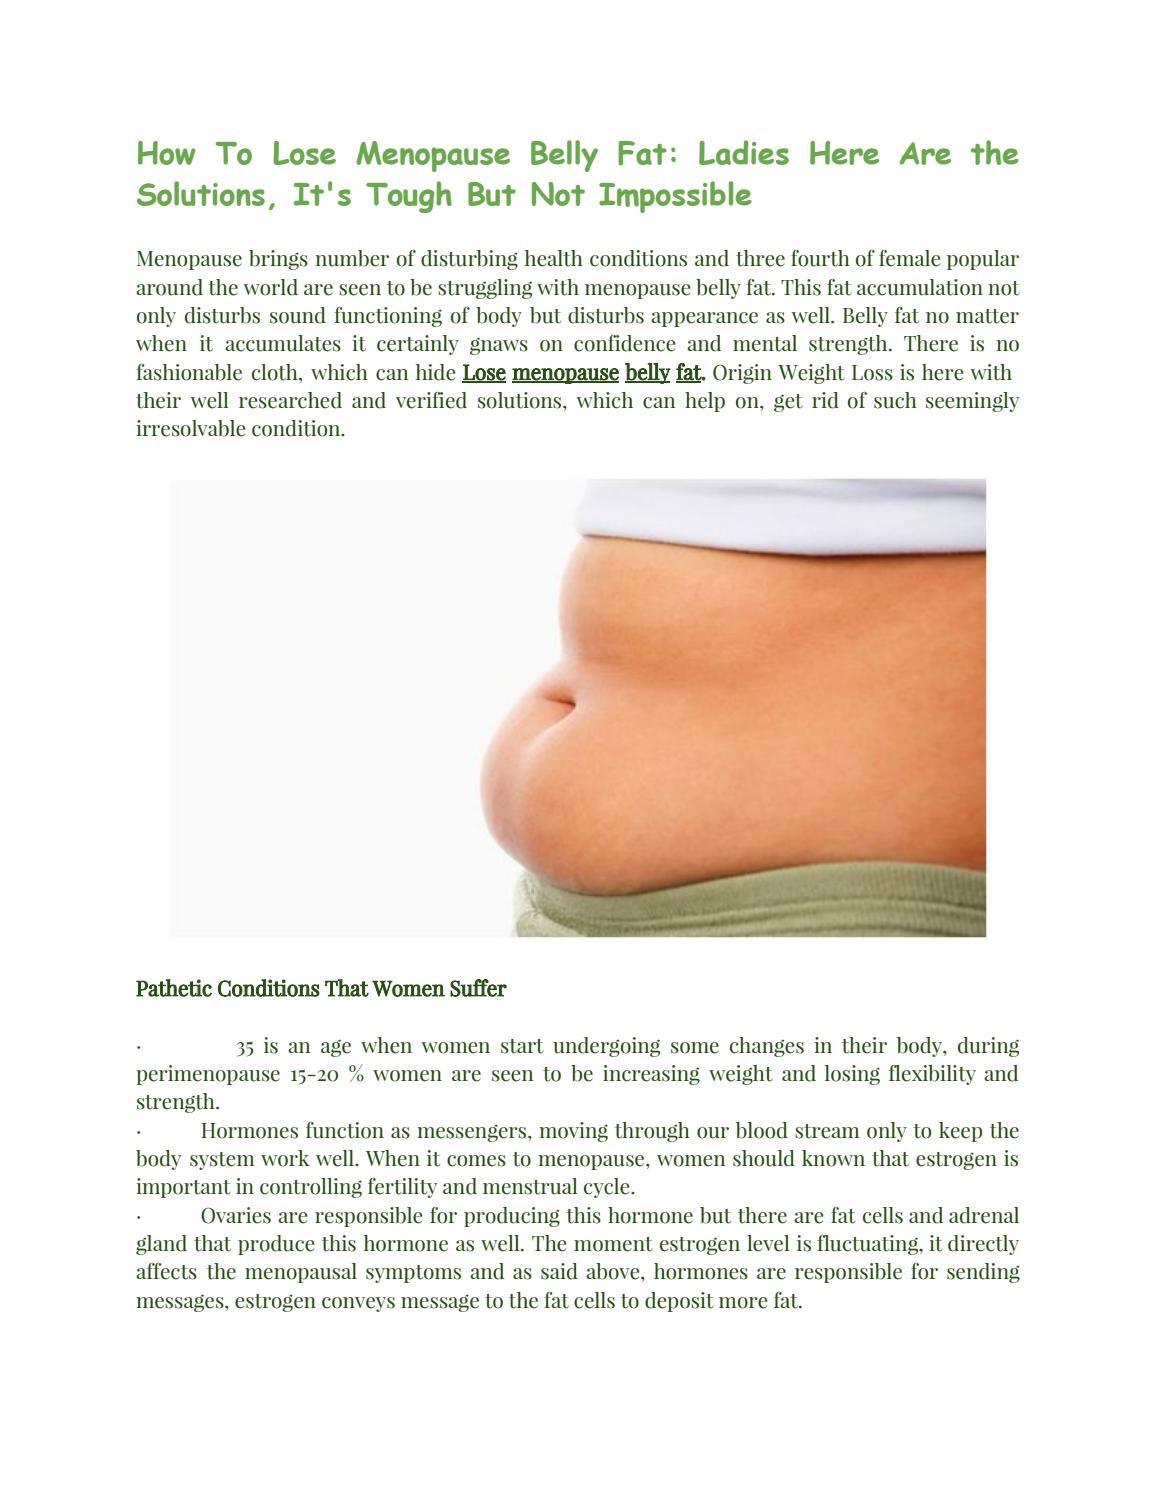 How To Lose Belly Fat During Menopause
 How To Lose Menopause Belly Fat La s Here Are the